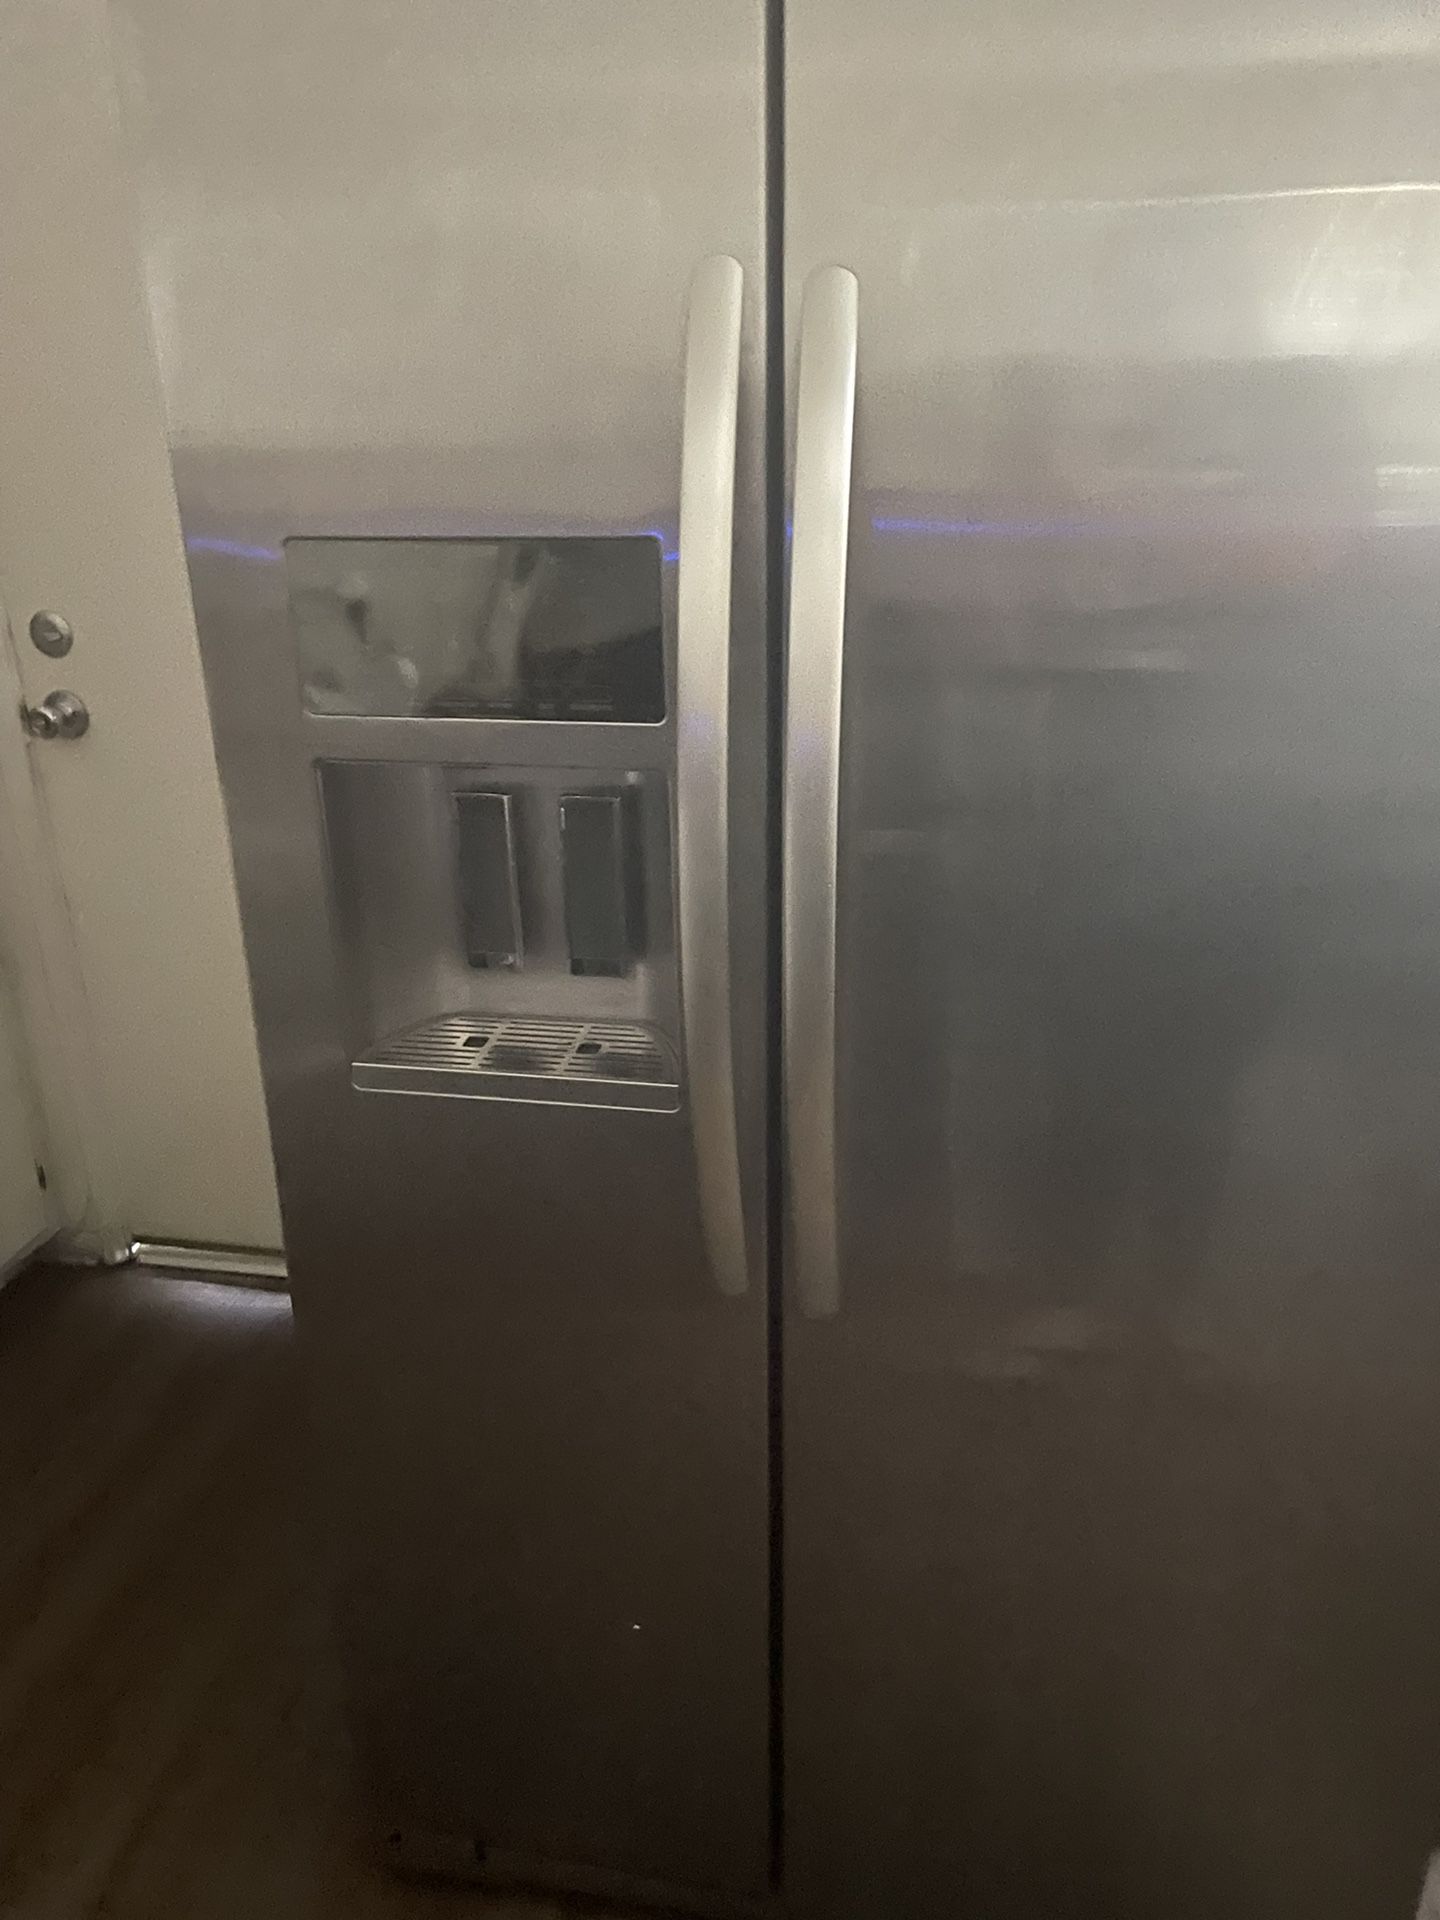 refrigerator good condition, large space, clean; freezer needs to be checked, something simple 300$ Or Best Ofert